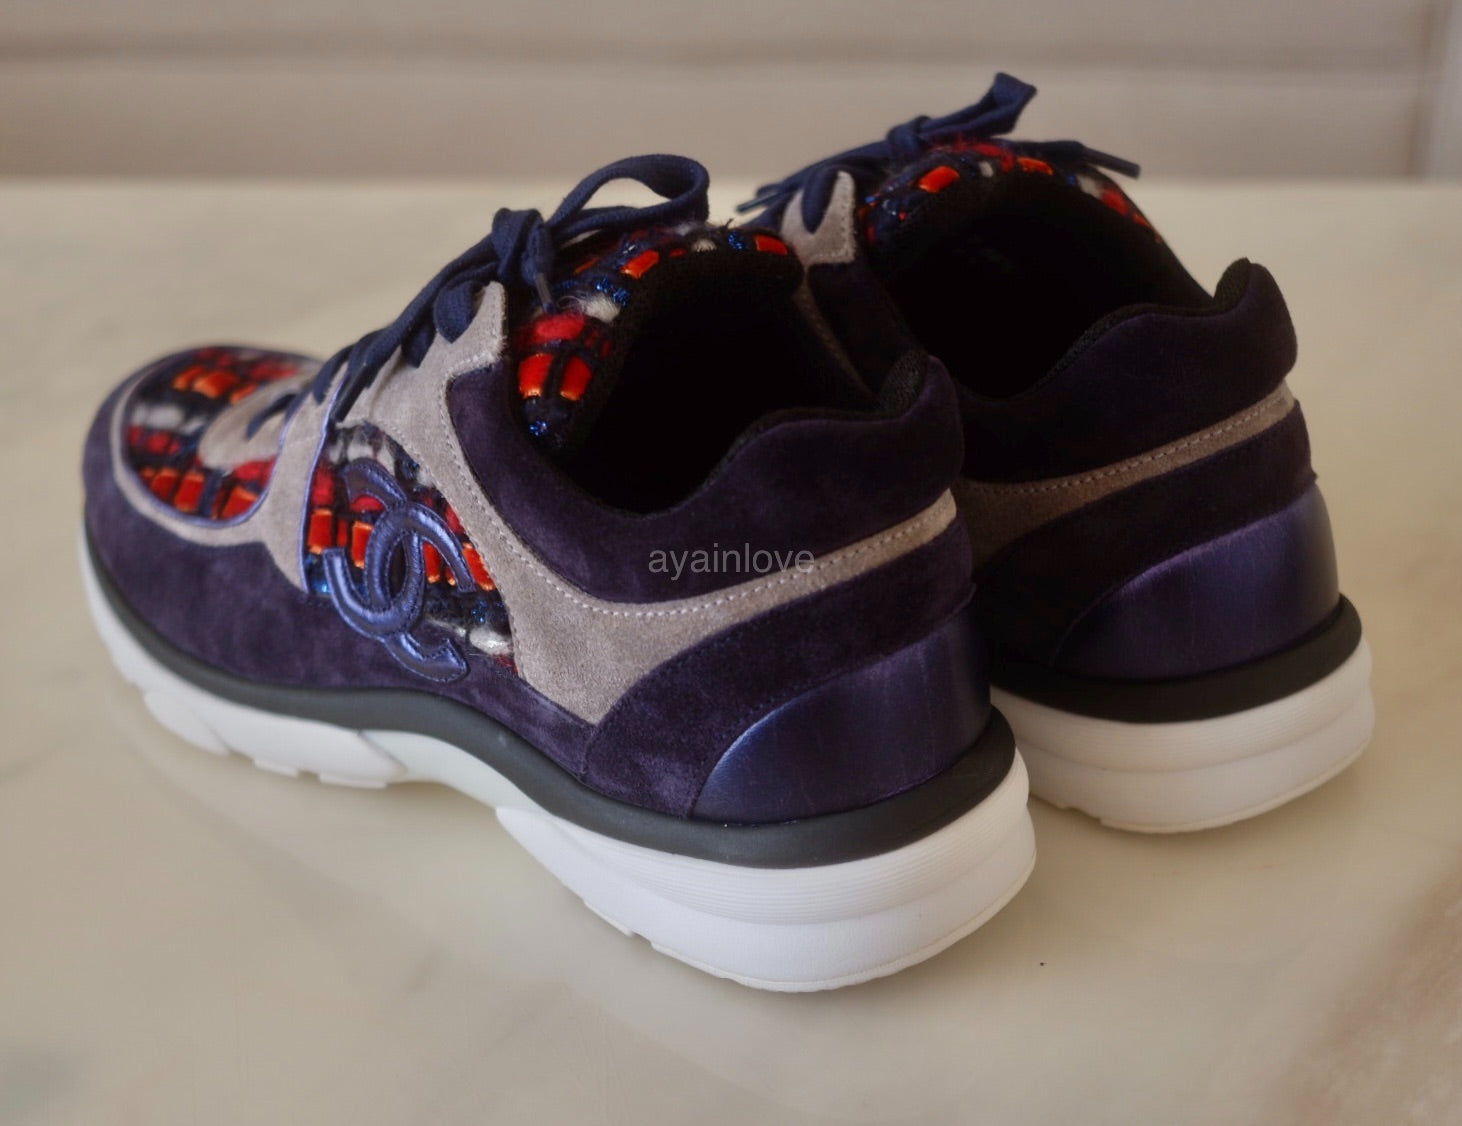 CHANEL 18A Multicolour Blue Red Tweed and Suede Calfskin Sneakers